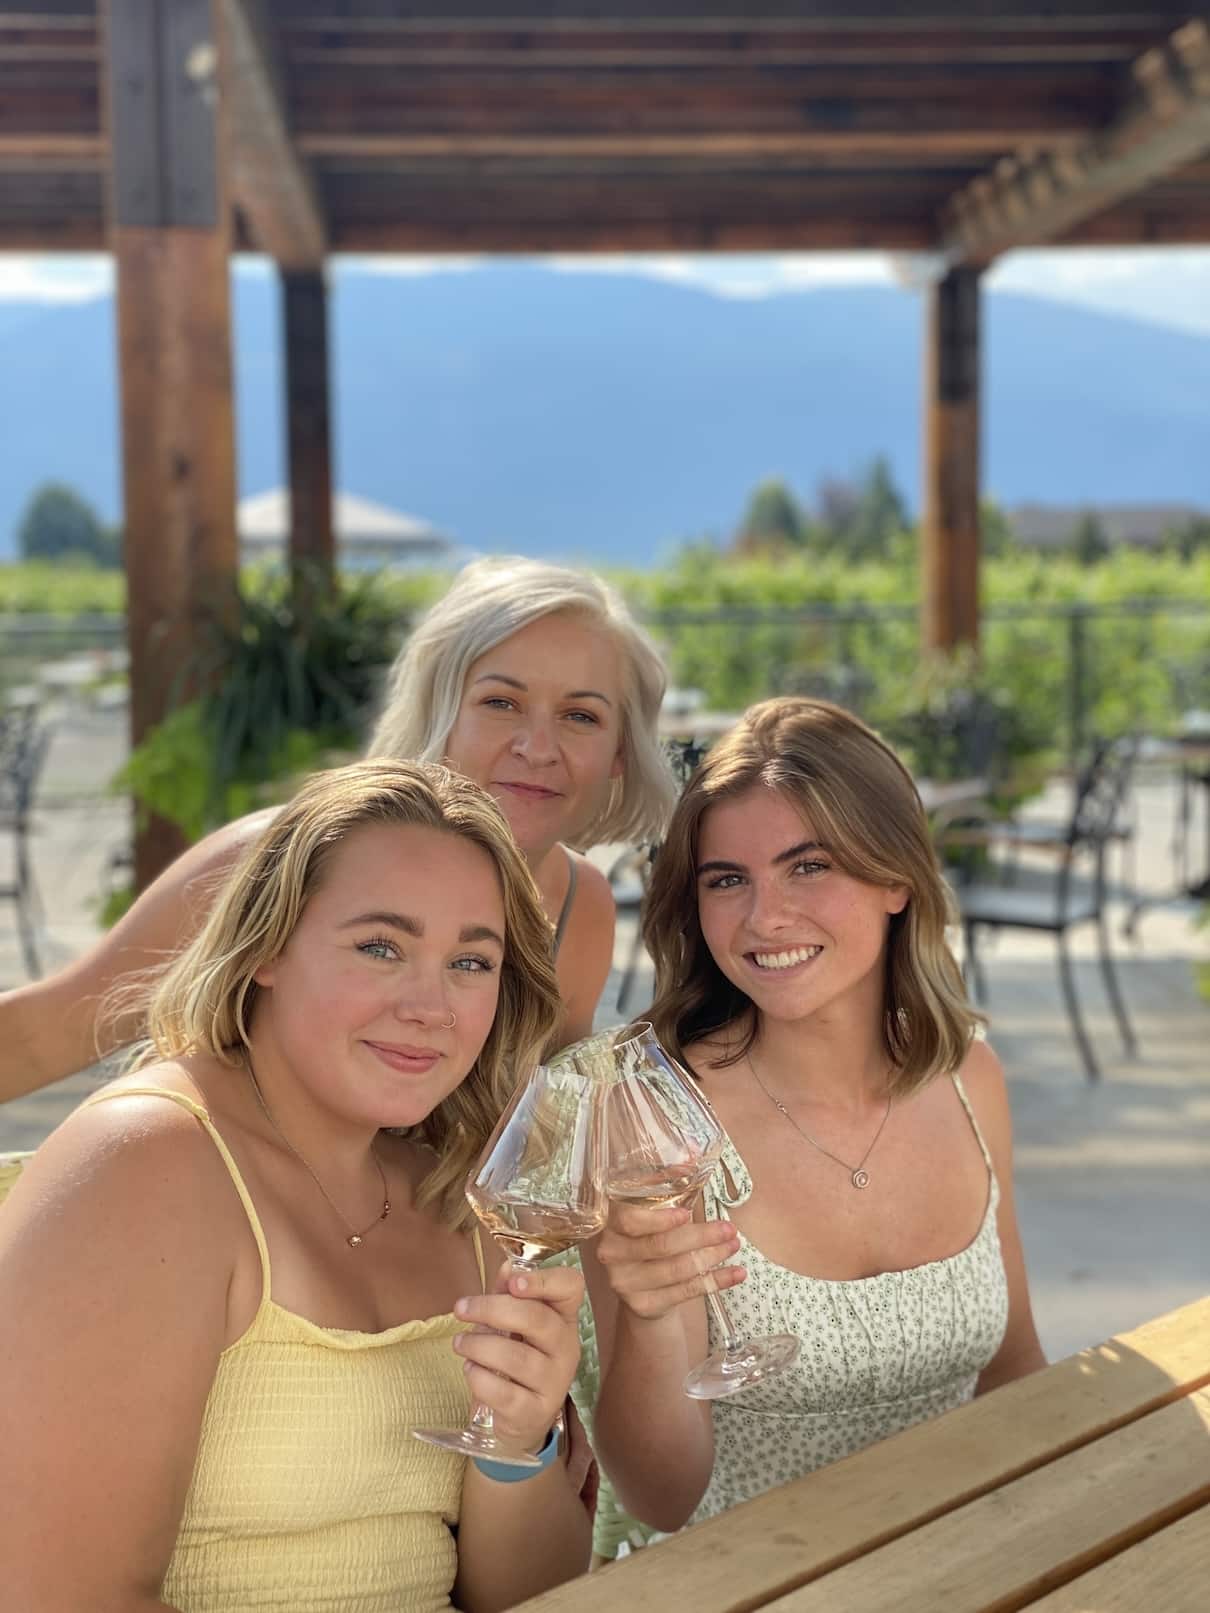 Cheers to a great day of wine tasting in Kelowna